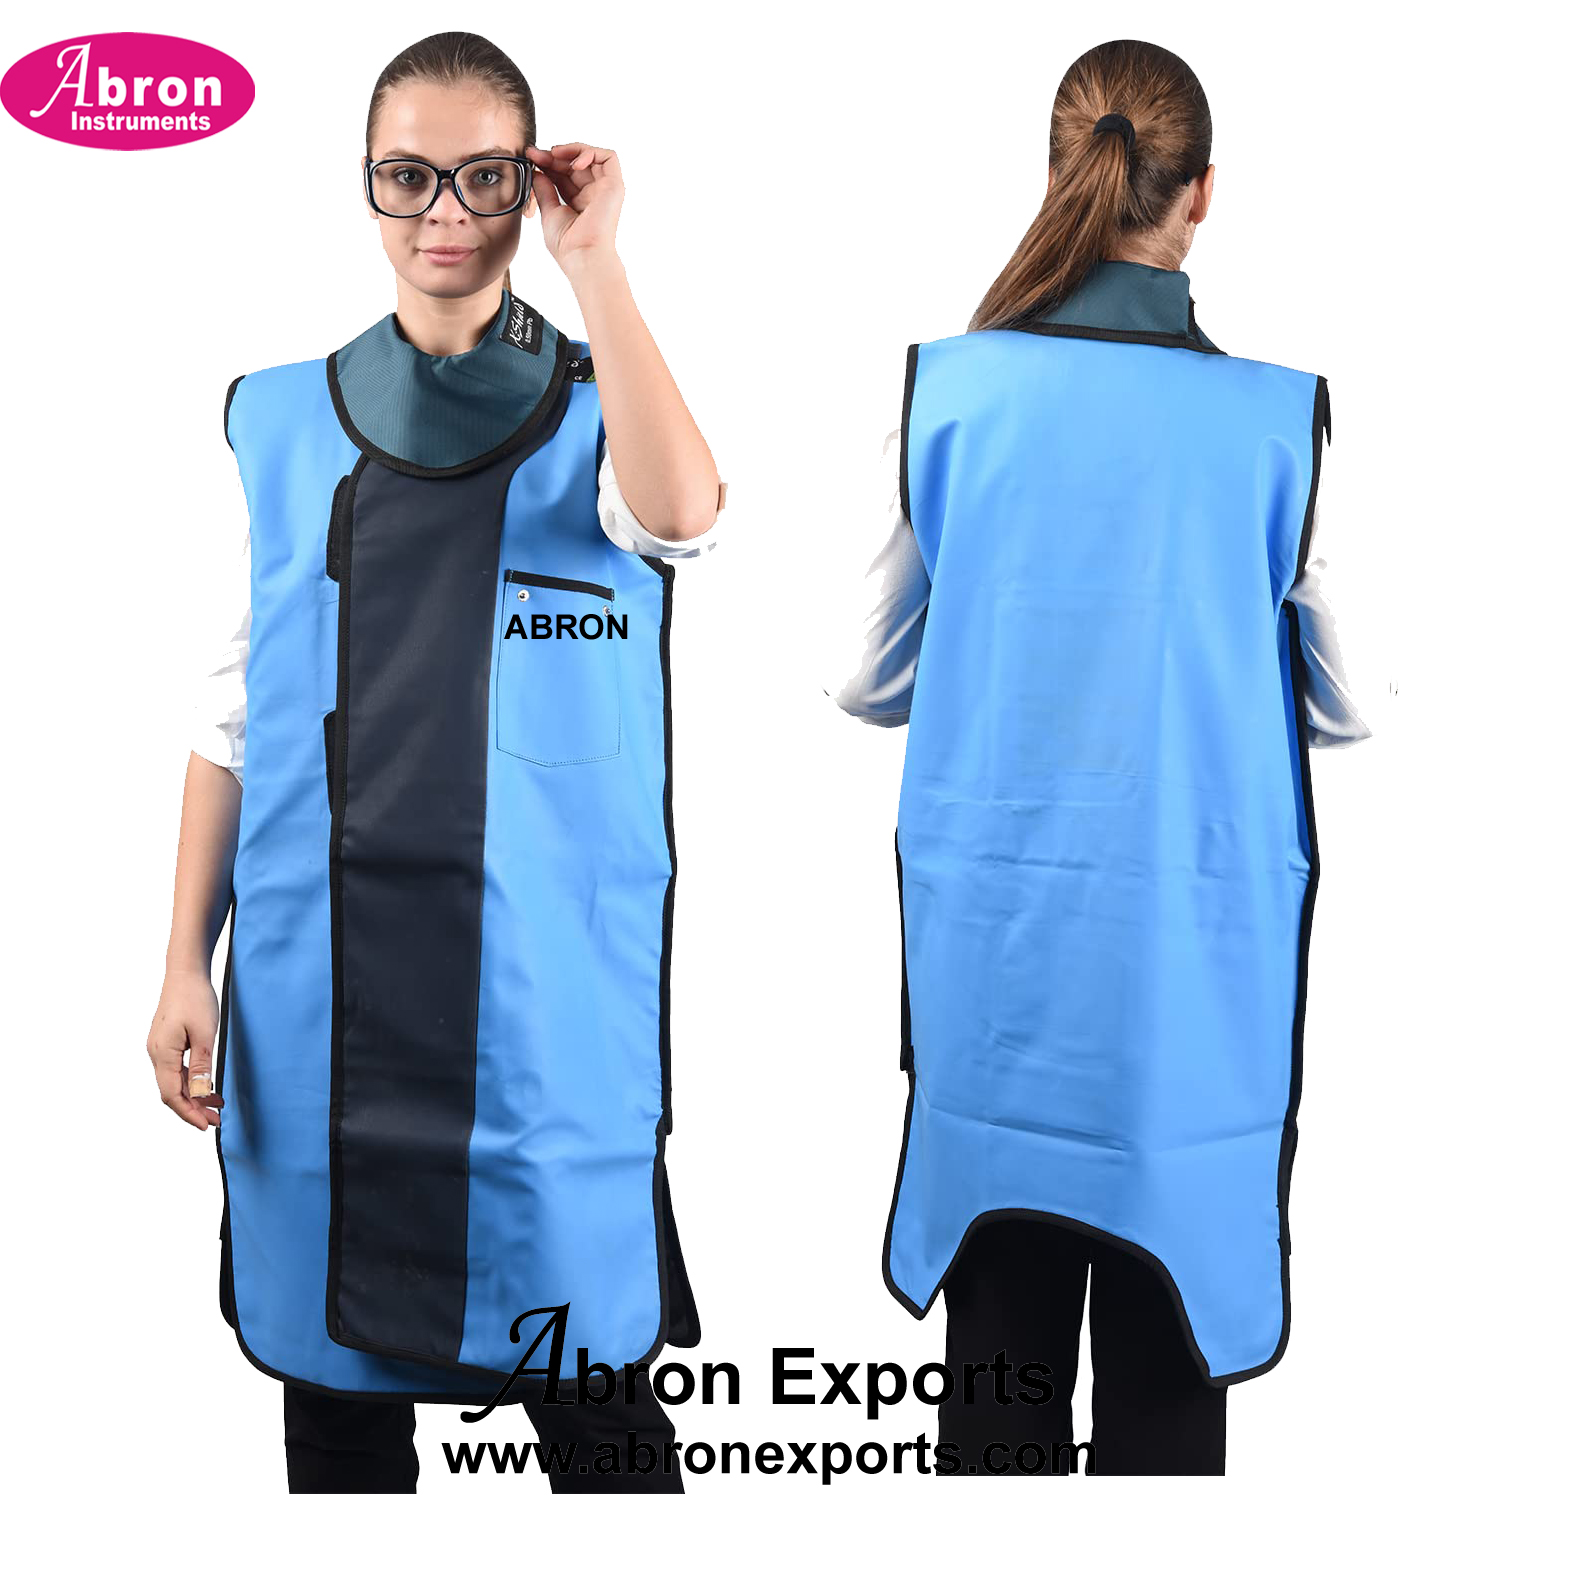 Ortho X-ray lead Apron Double sides Front back Absorber for Body shield 0.5mm inside cover Clinical Hospital Nursing home Abron ABM-2780AD 